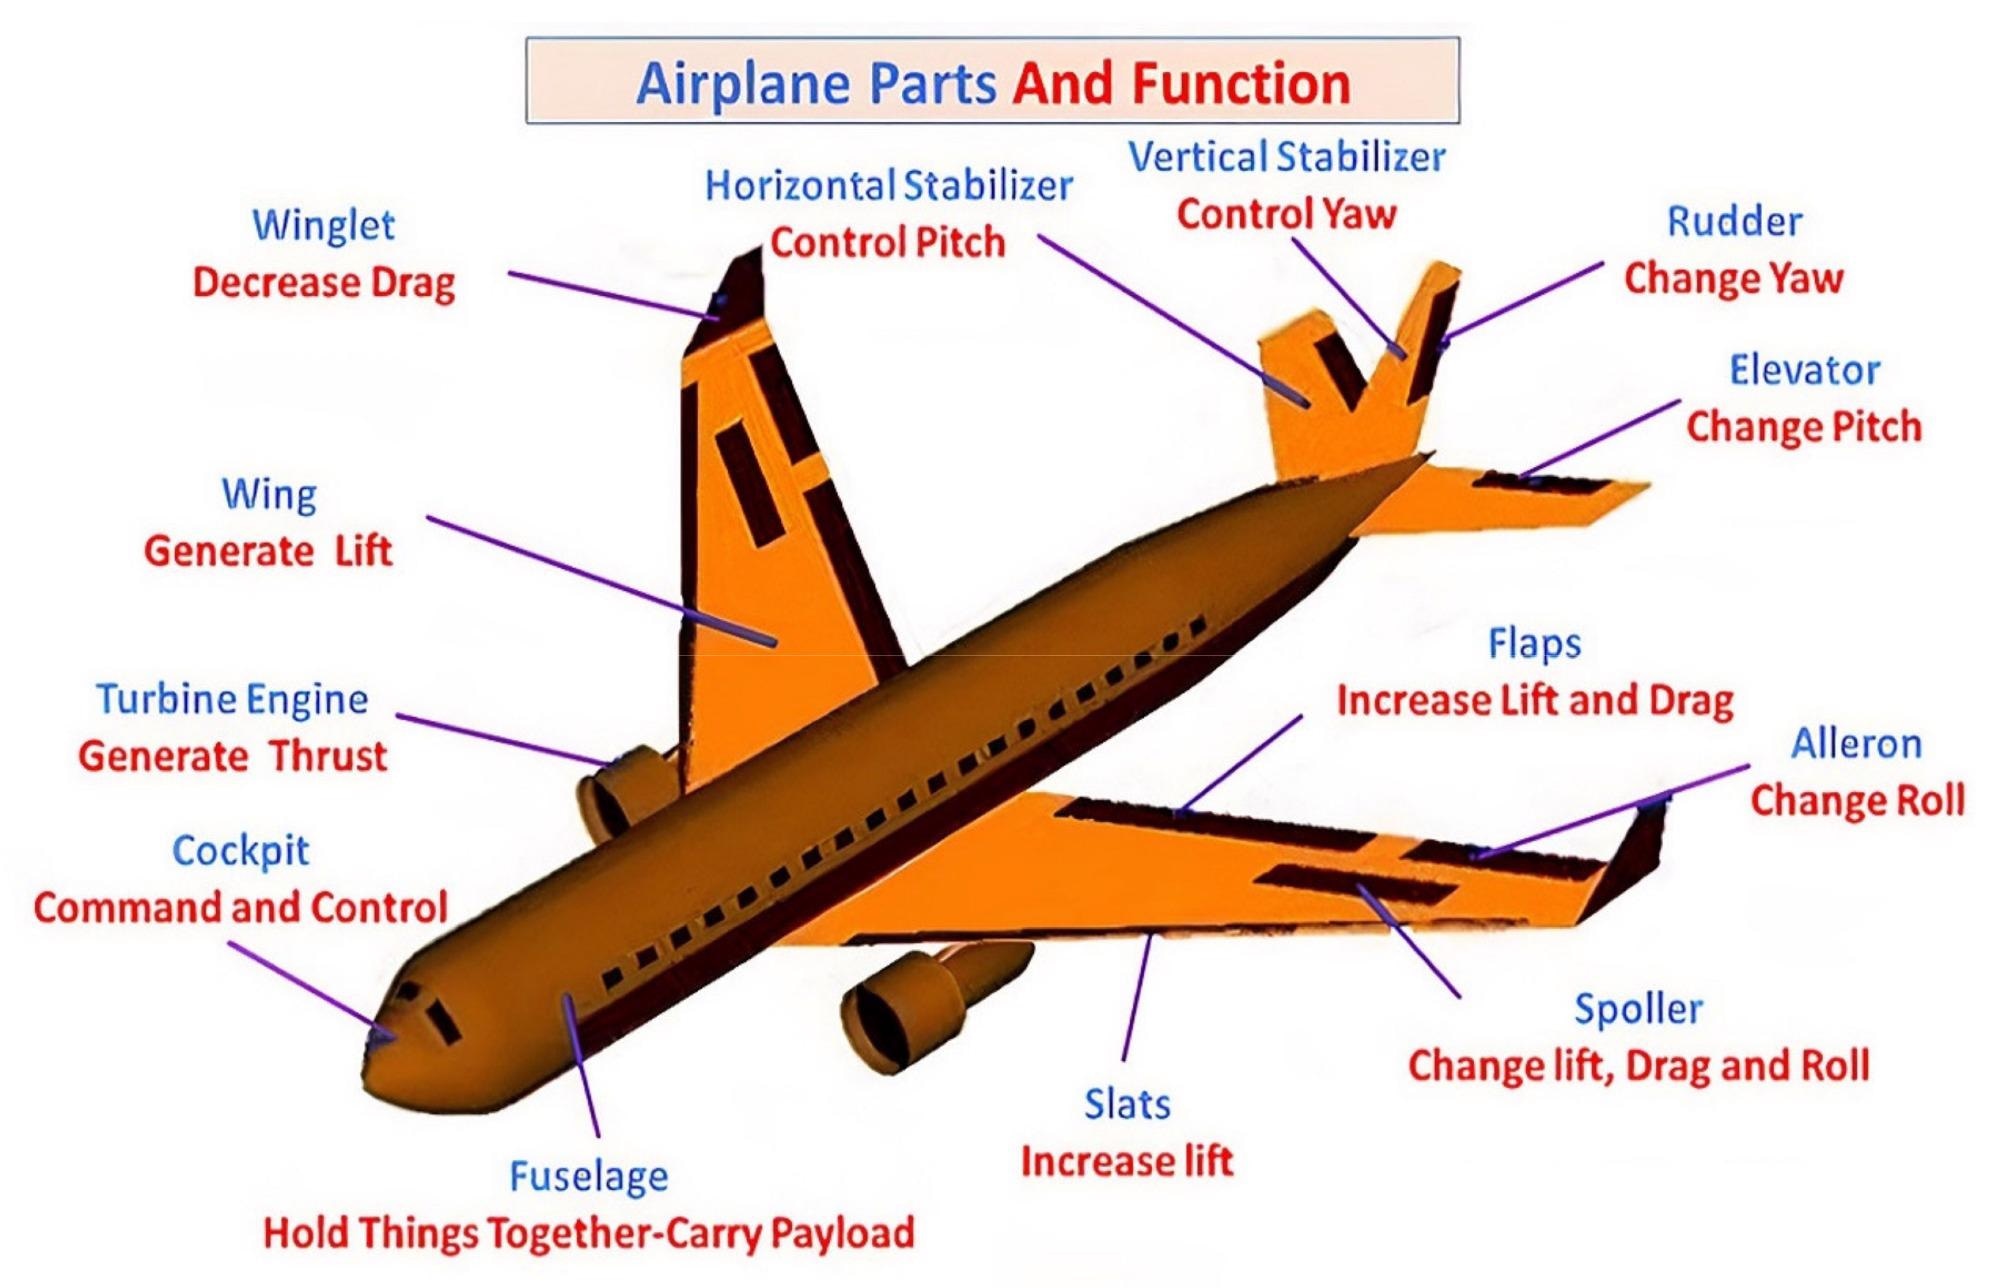 Airplane components and functions [24,26].